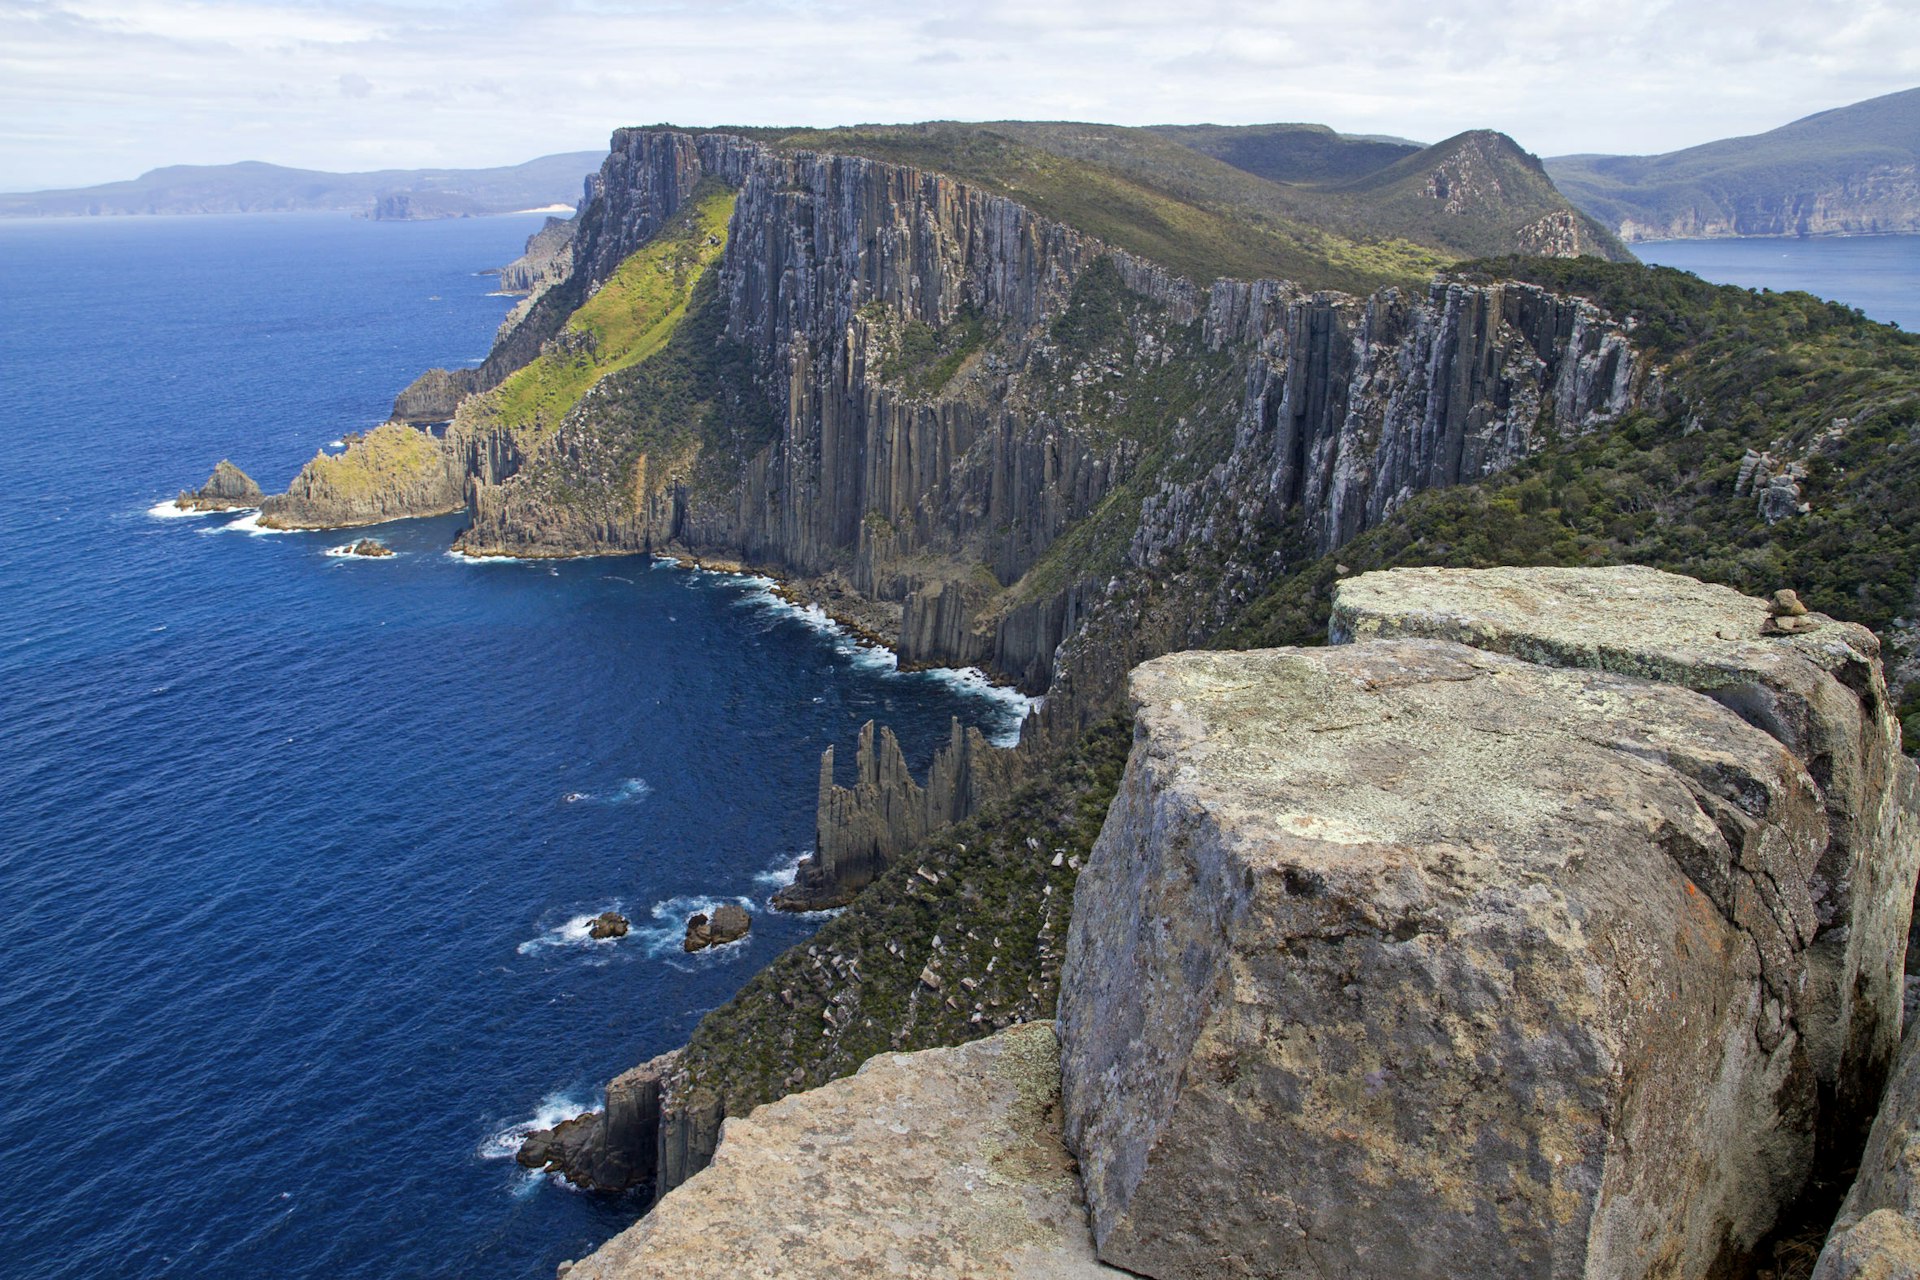 The dolerite cliffs along which the Three Capes Track journeys near Cape Pillar © Andrew Bain / Lonely Planet